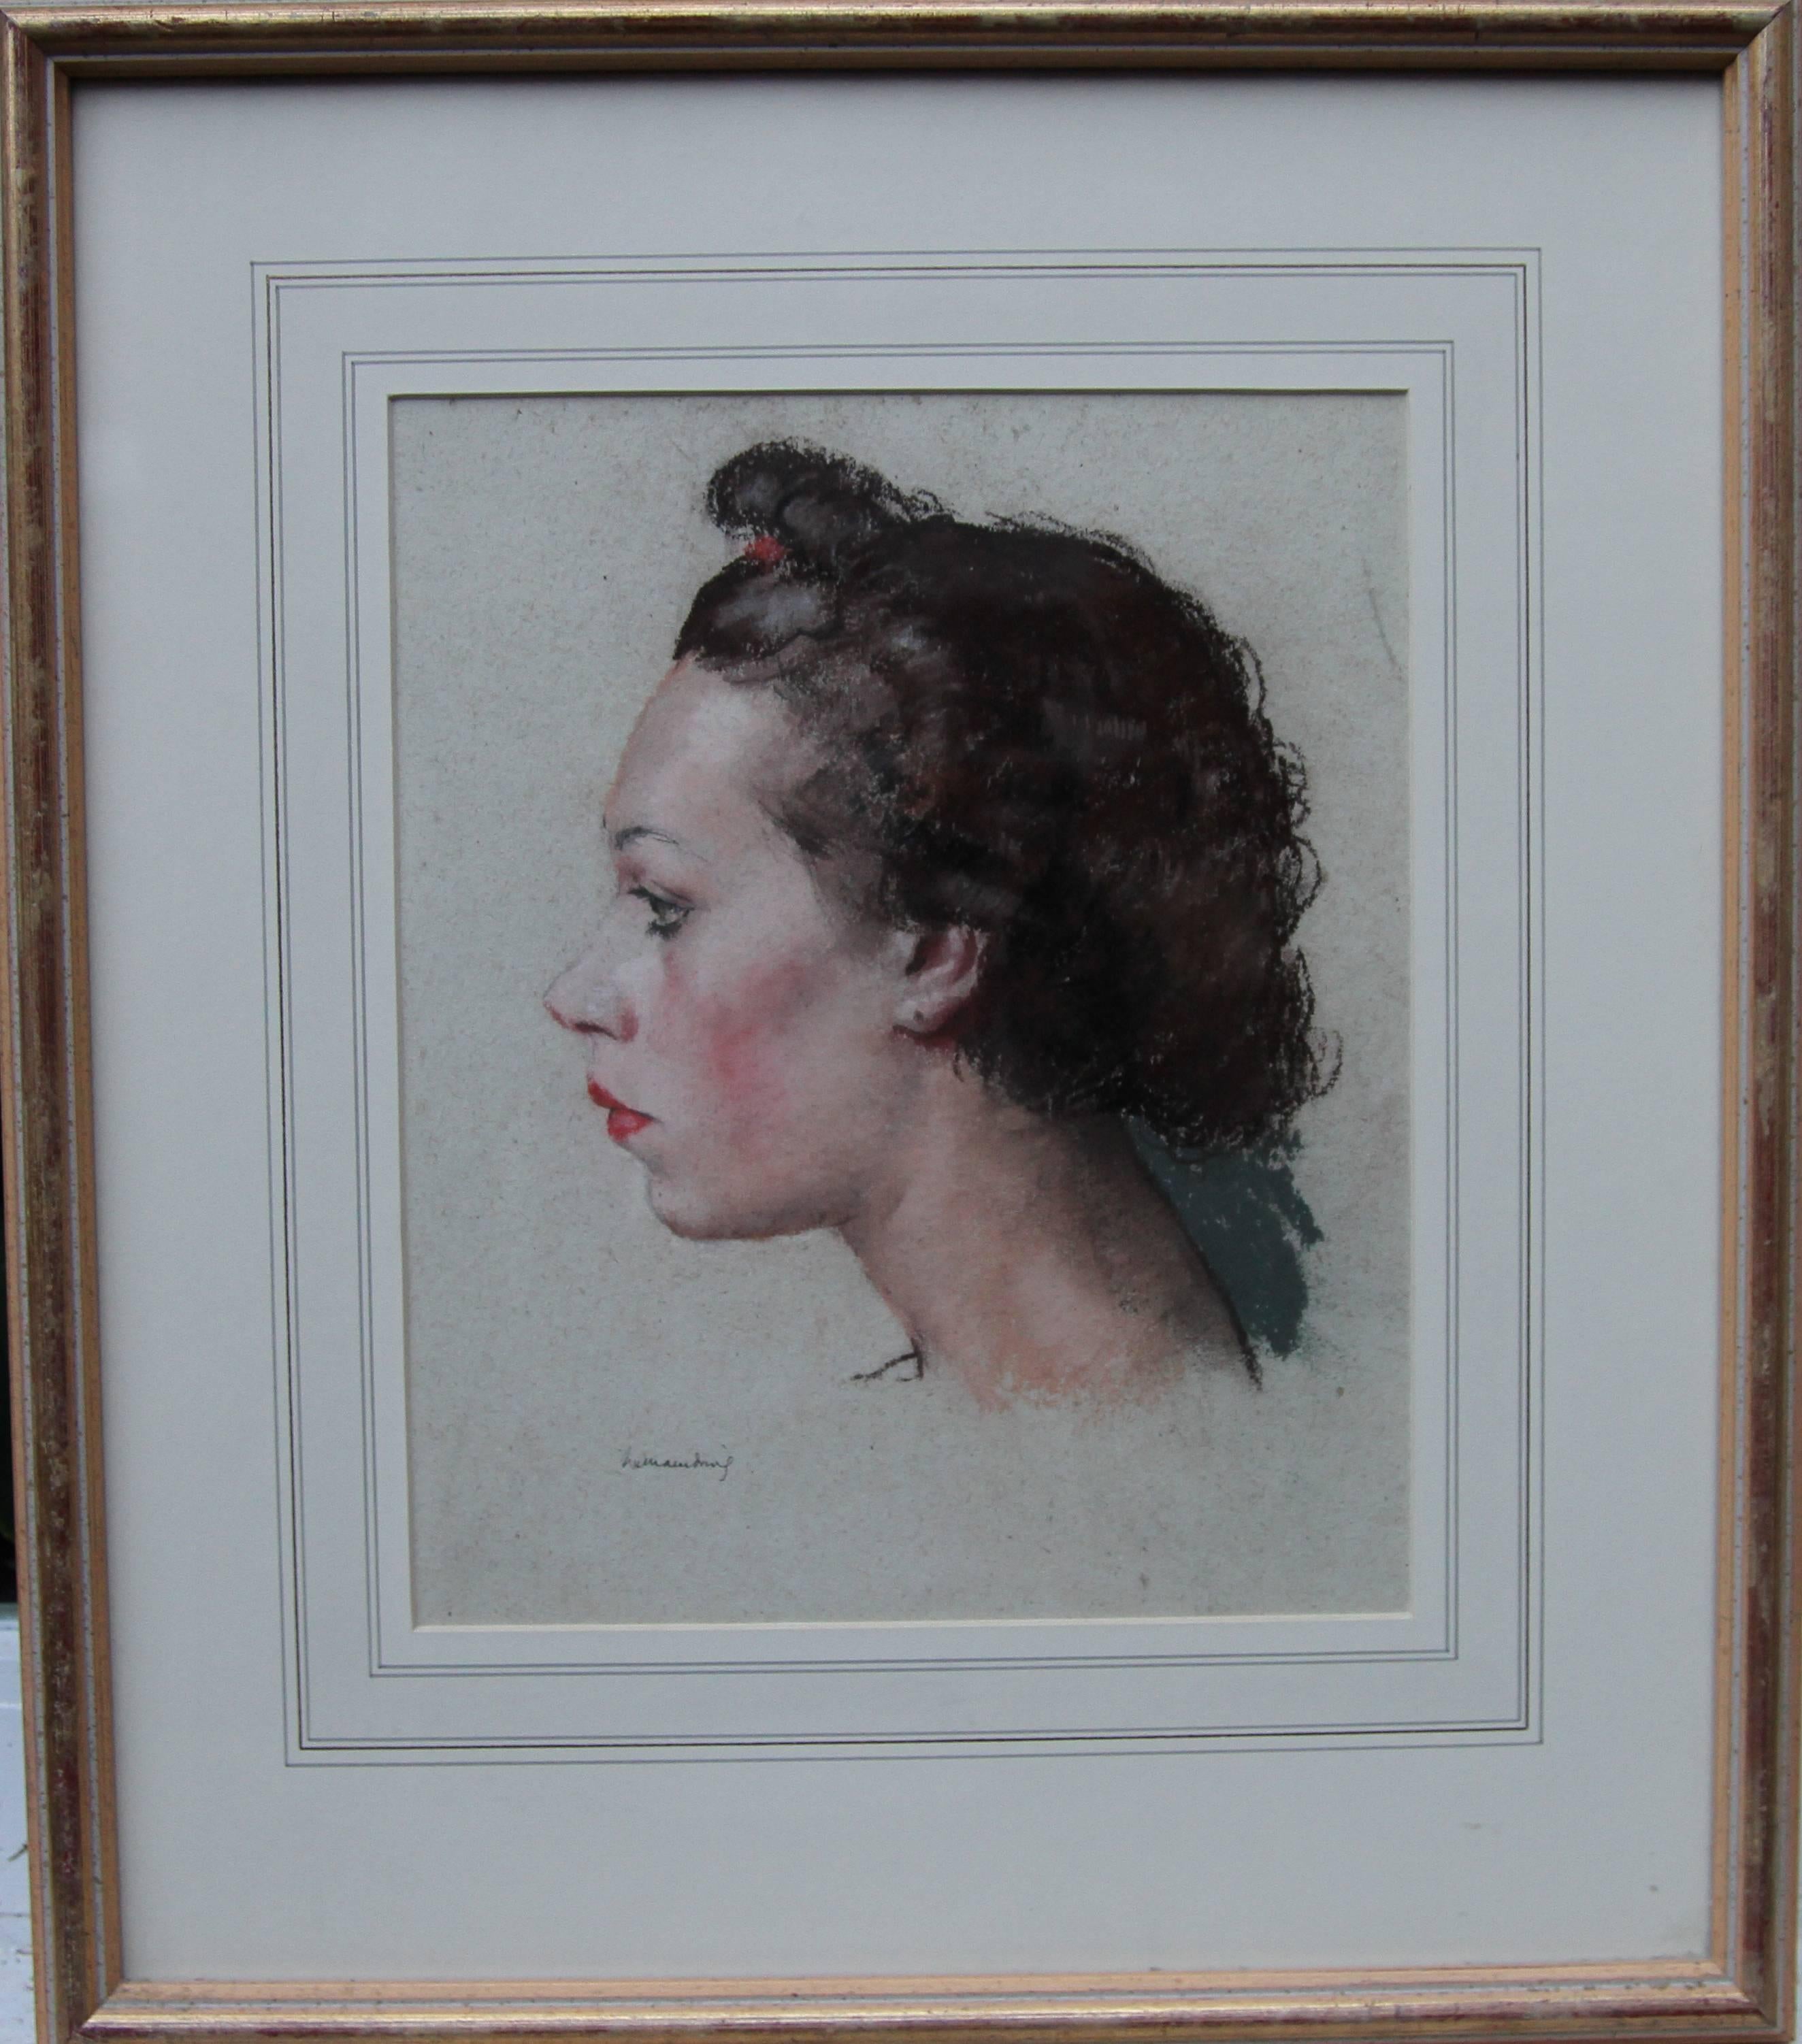 A fine detailed watercolour on paper by Royal Academician William Dring who was a noted portrait artist of the 20th century.  This portrait depicts a young woman in profile - and was painted circa 1937.  A very evocative Art Deco portrait. In